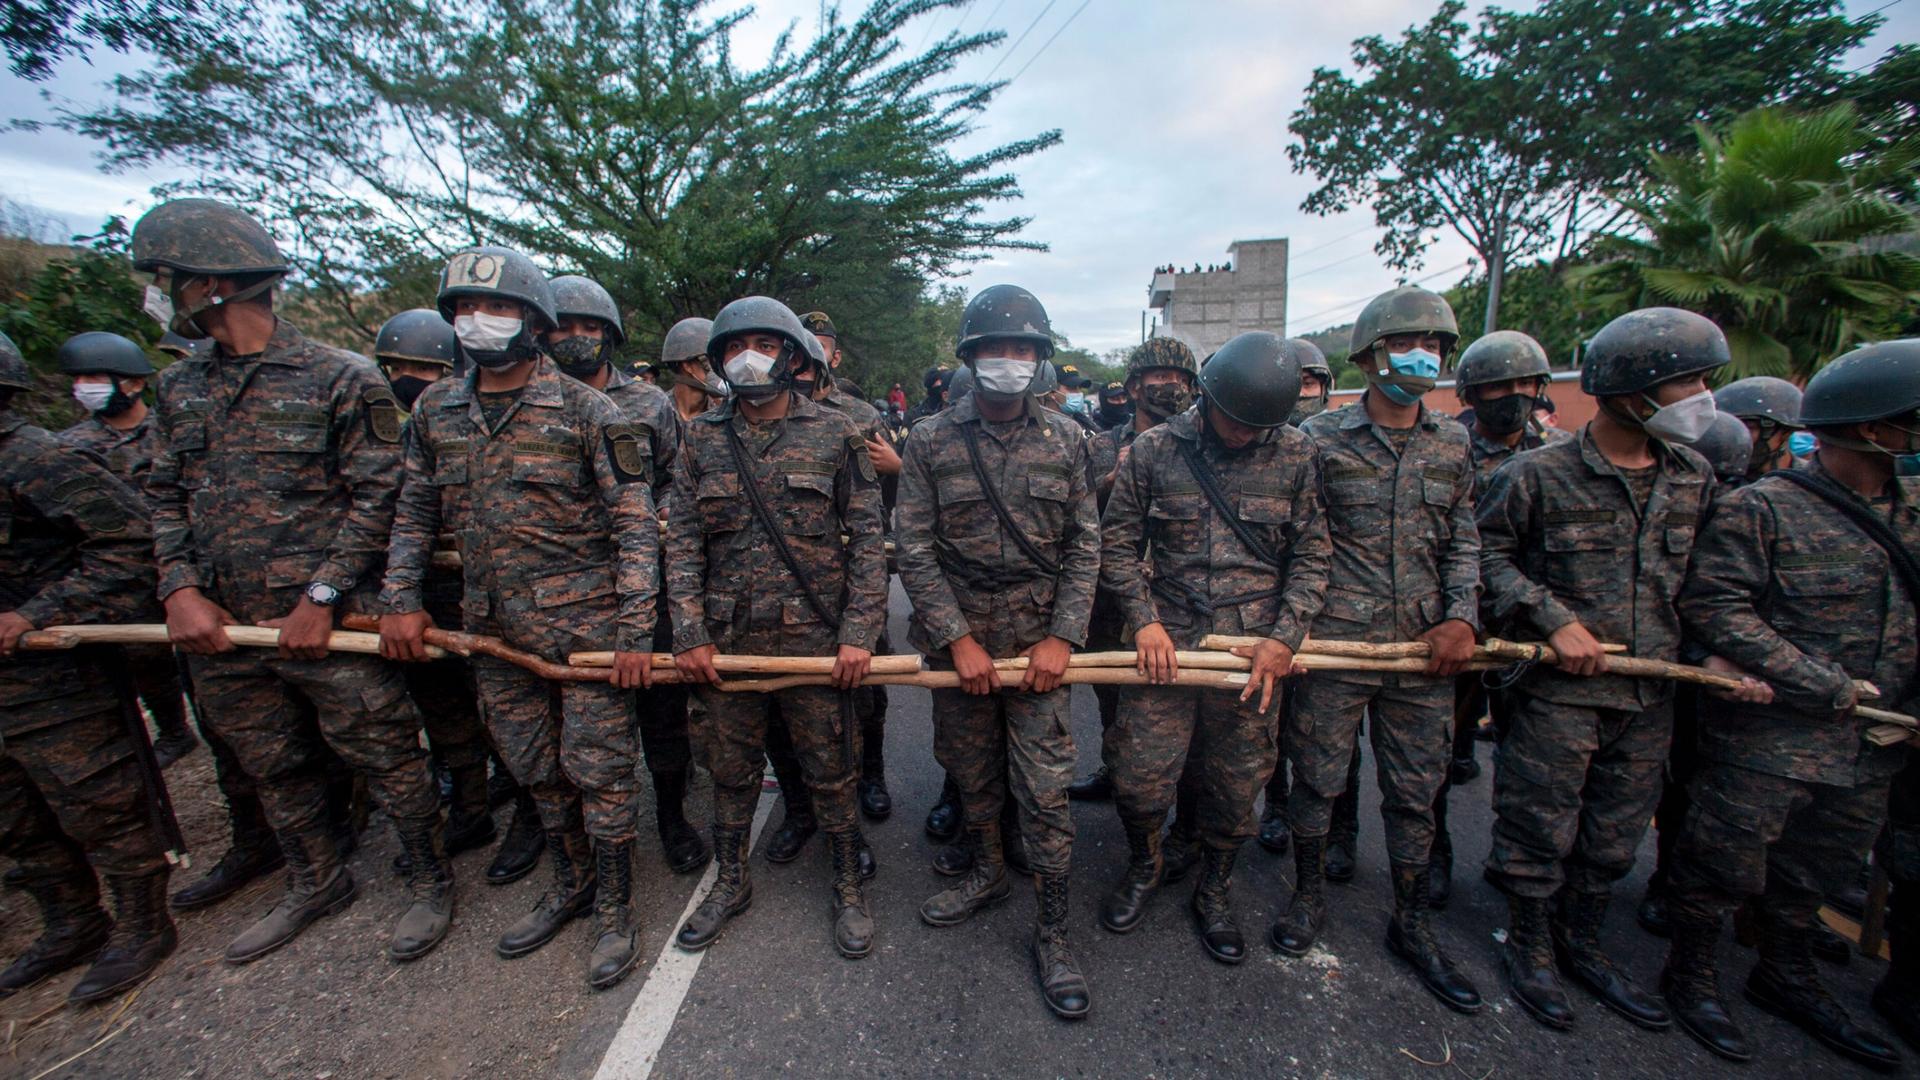 A line of security authorities are shown wearing fatigues and helmets and holding wooden poles.